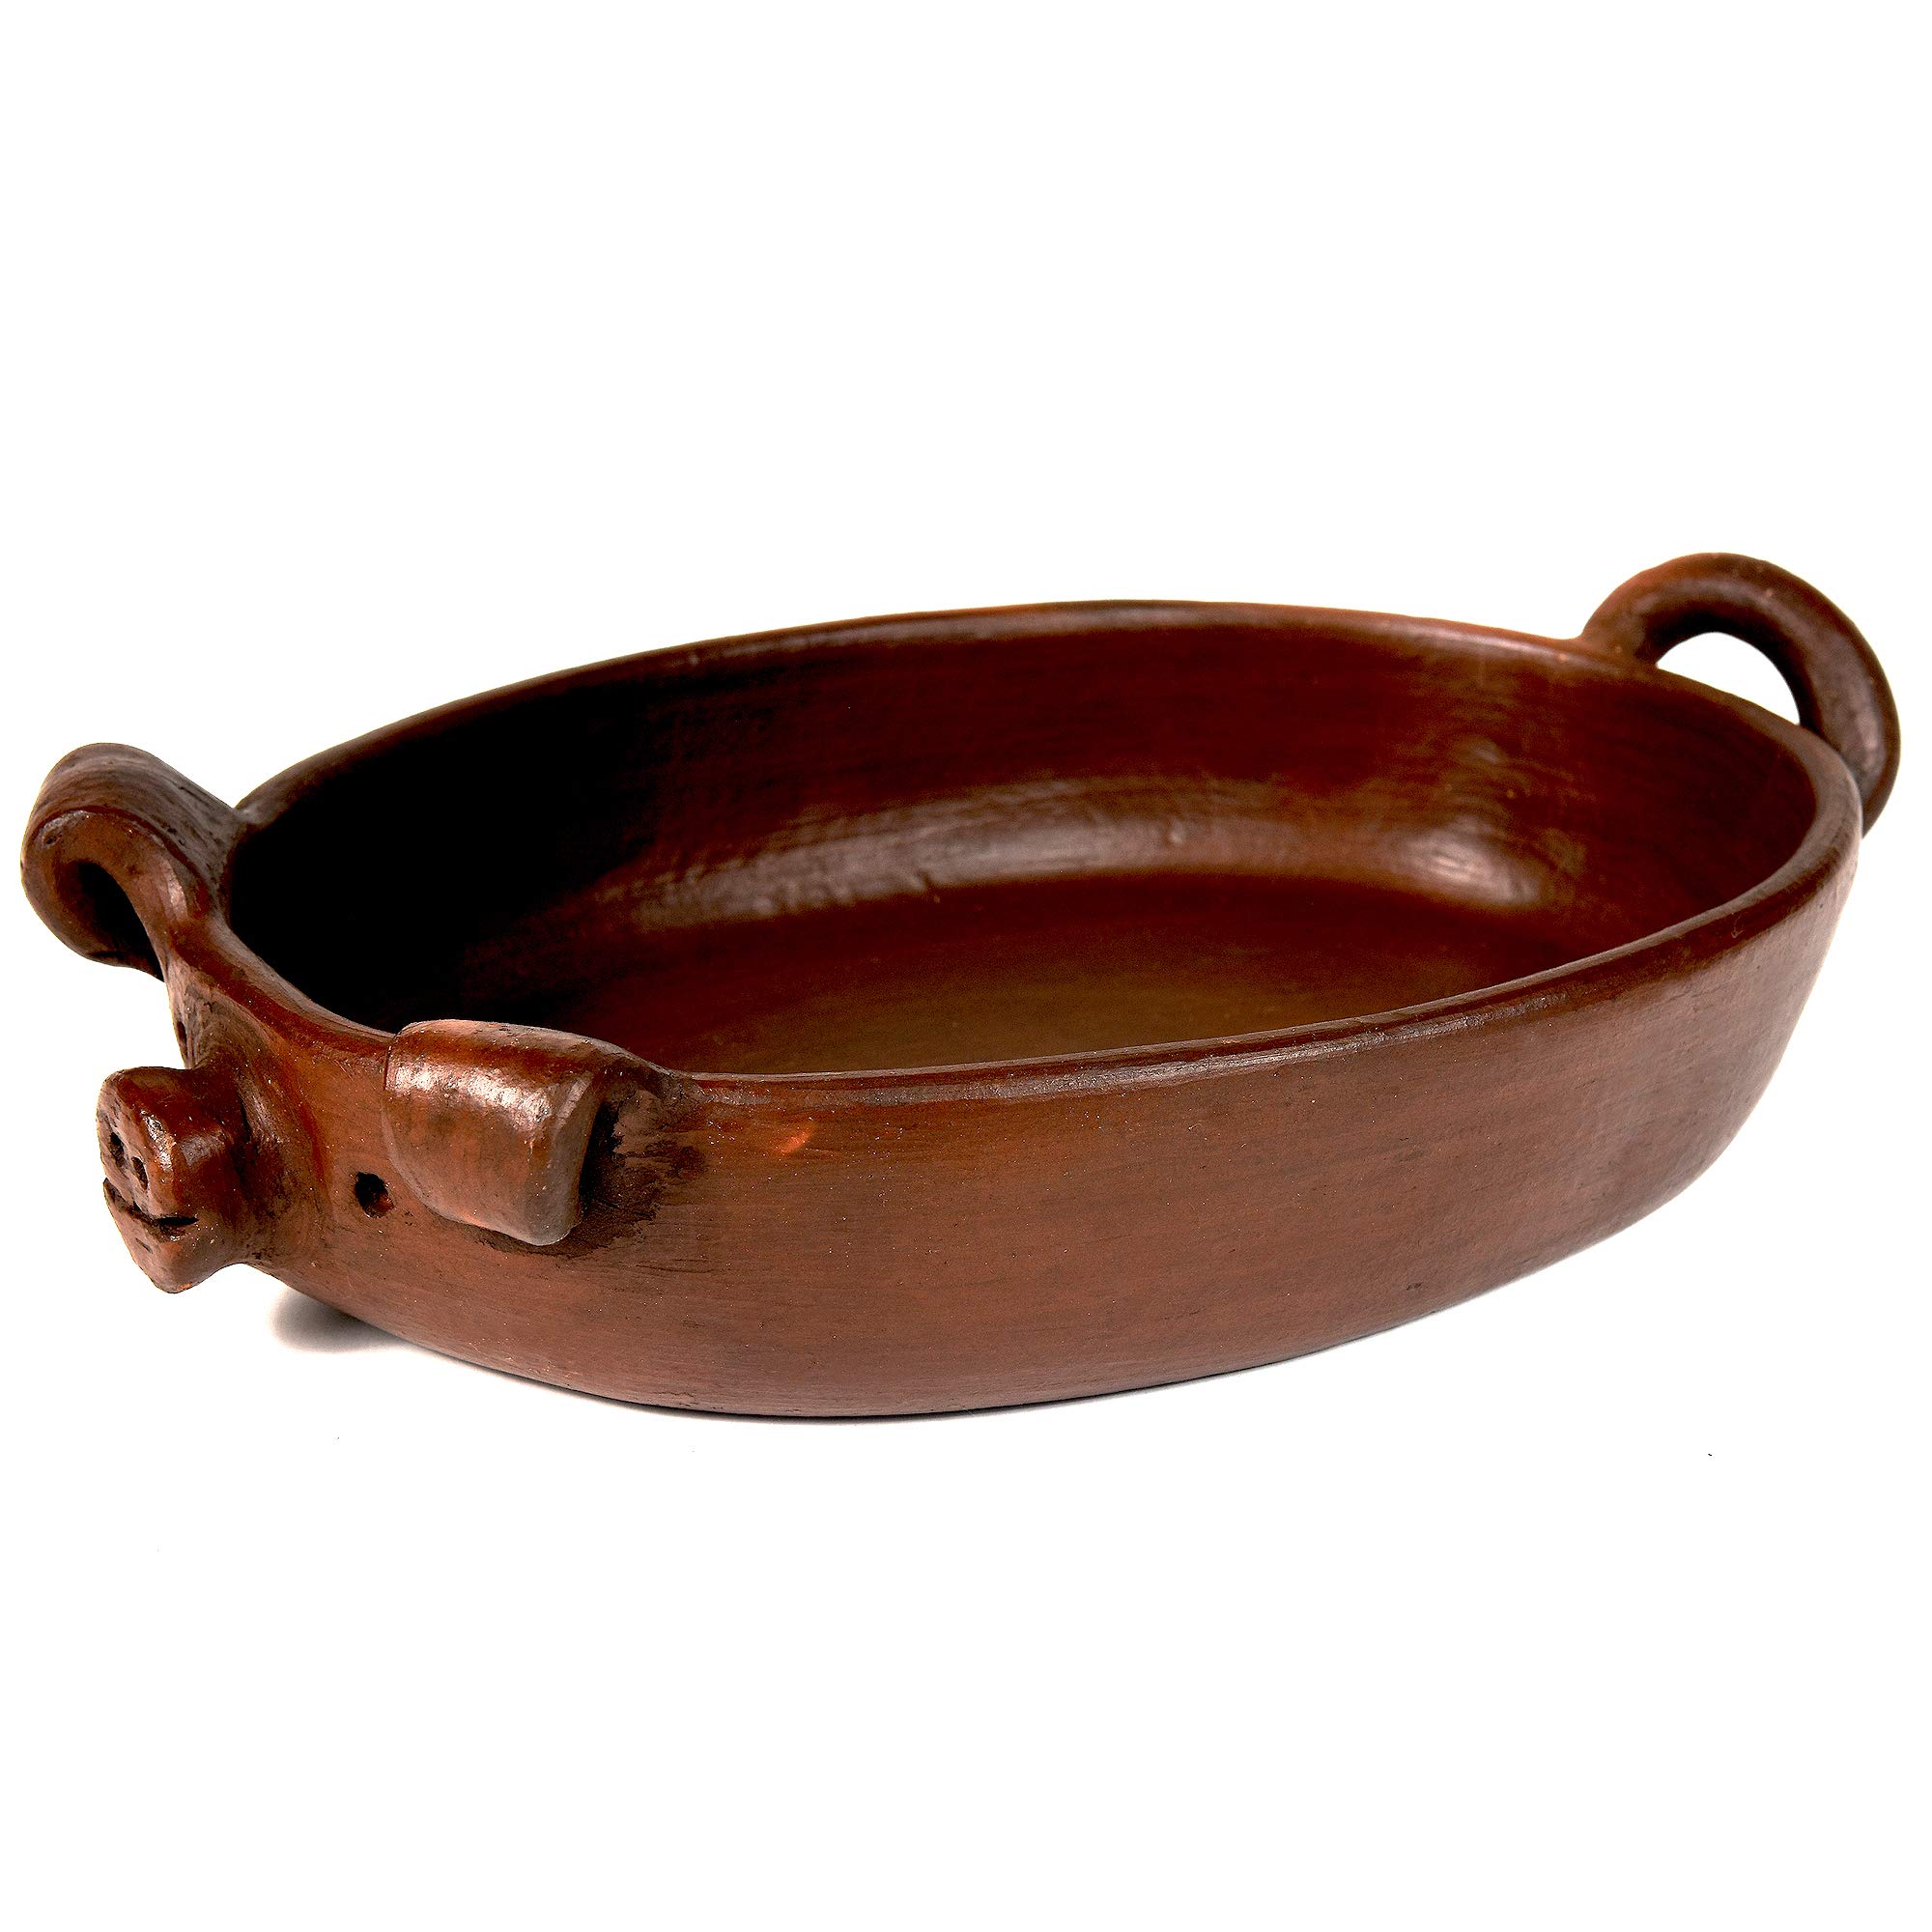 Ancient Cookware Pomaireware Clay Novelty Pig Faced Roasting Pan, 1.5 Quarts